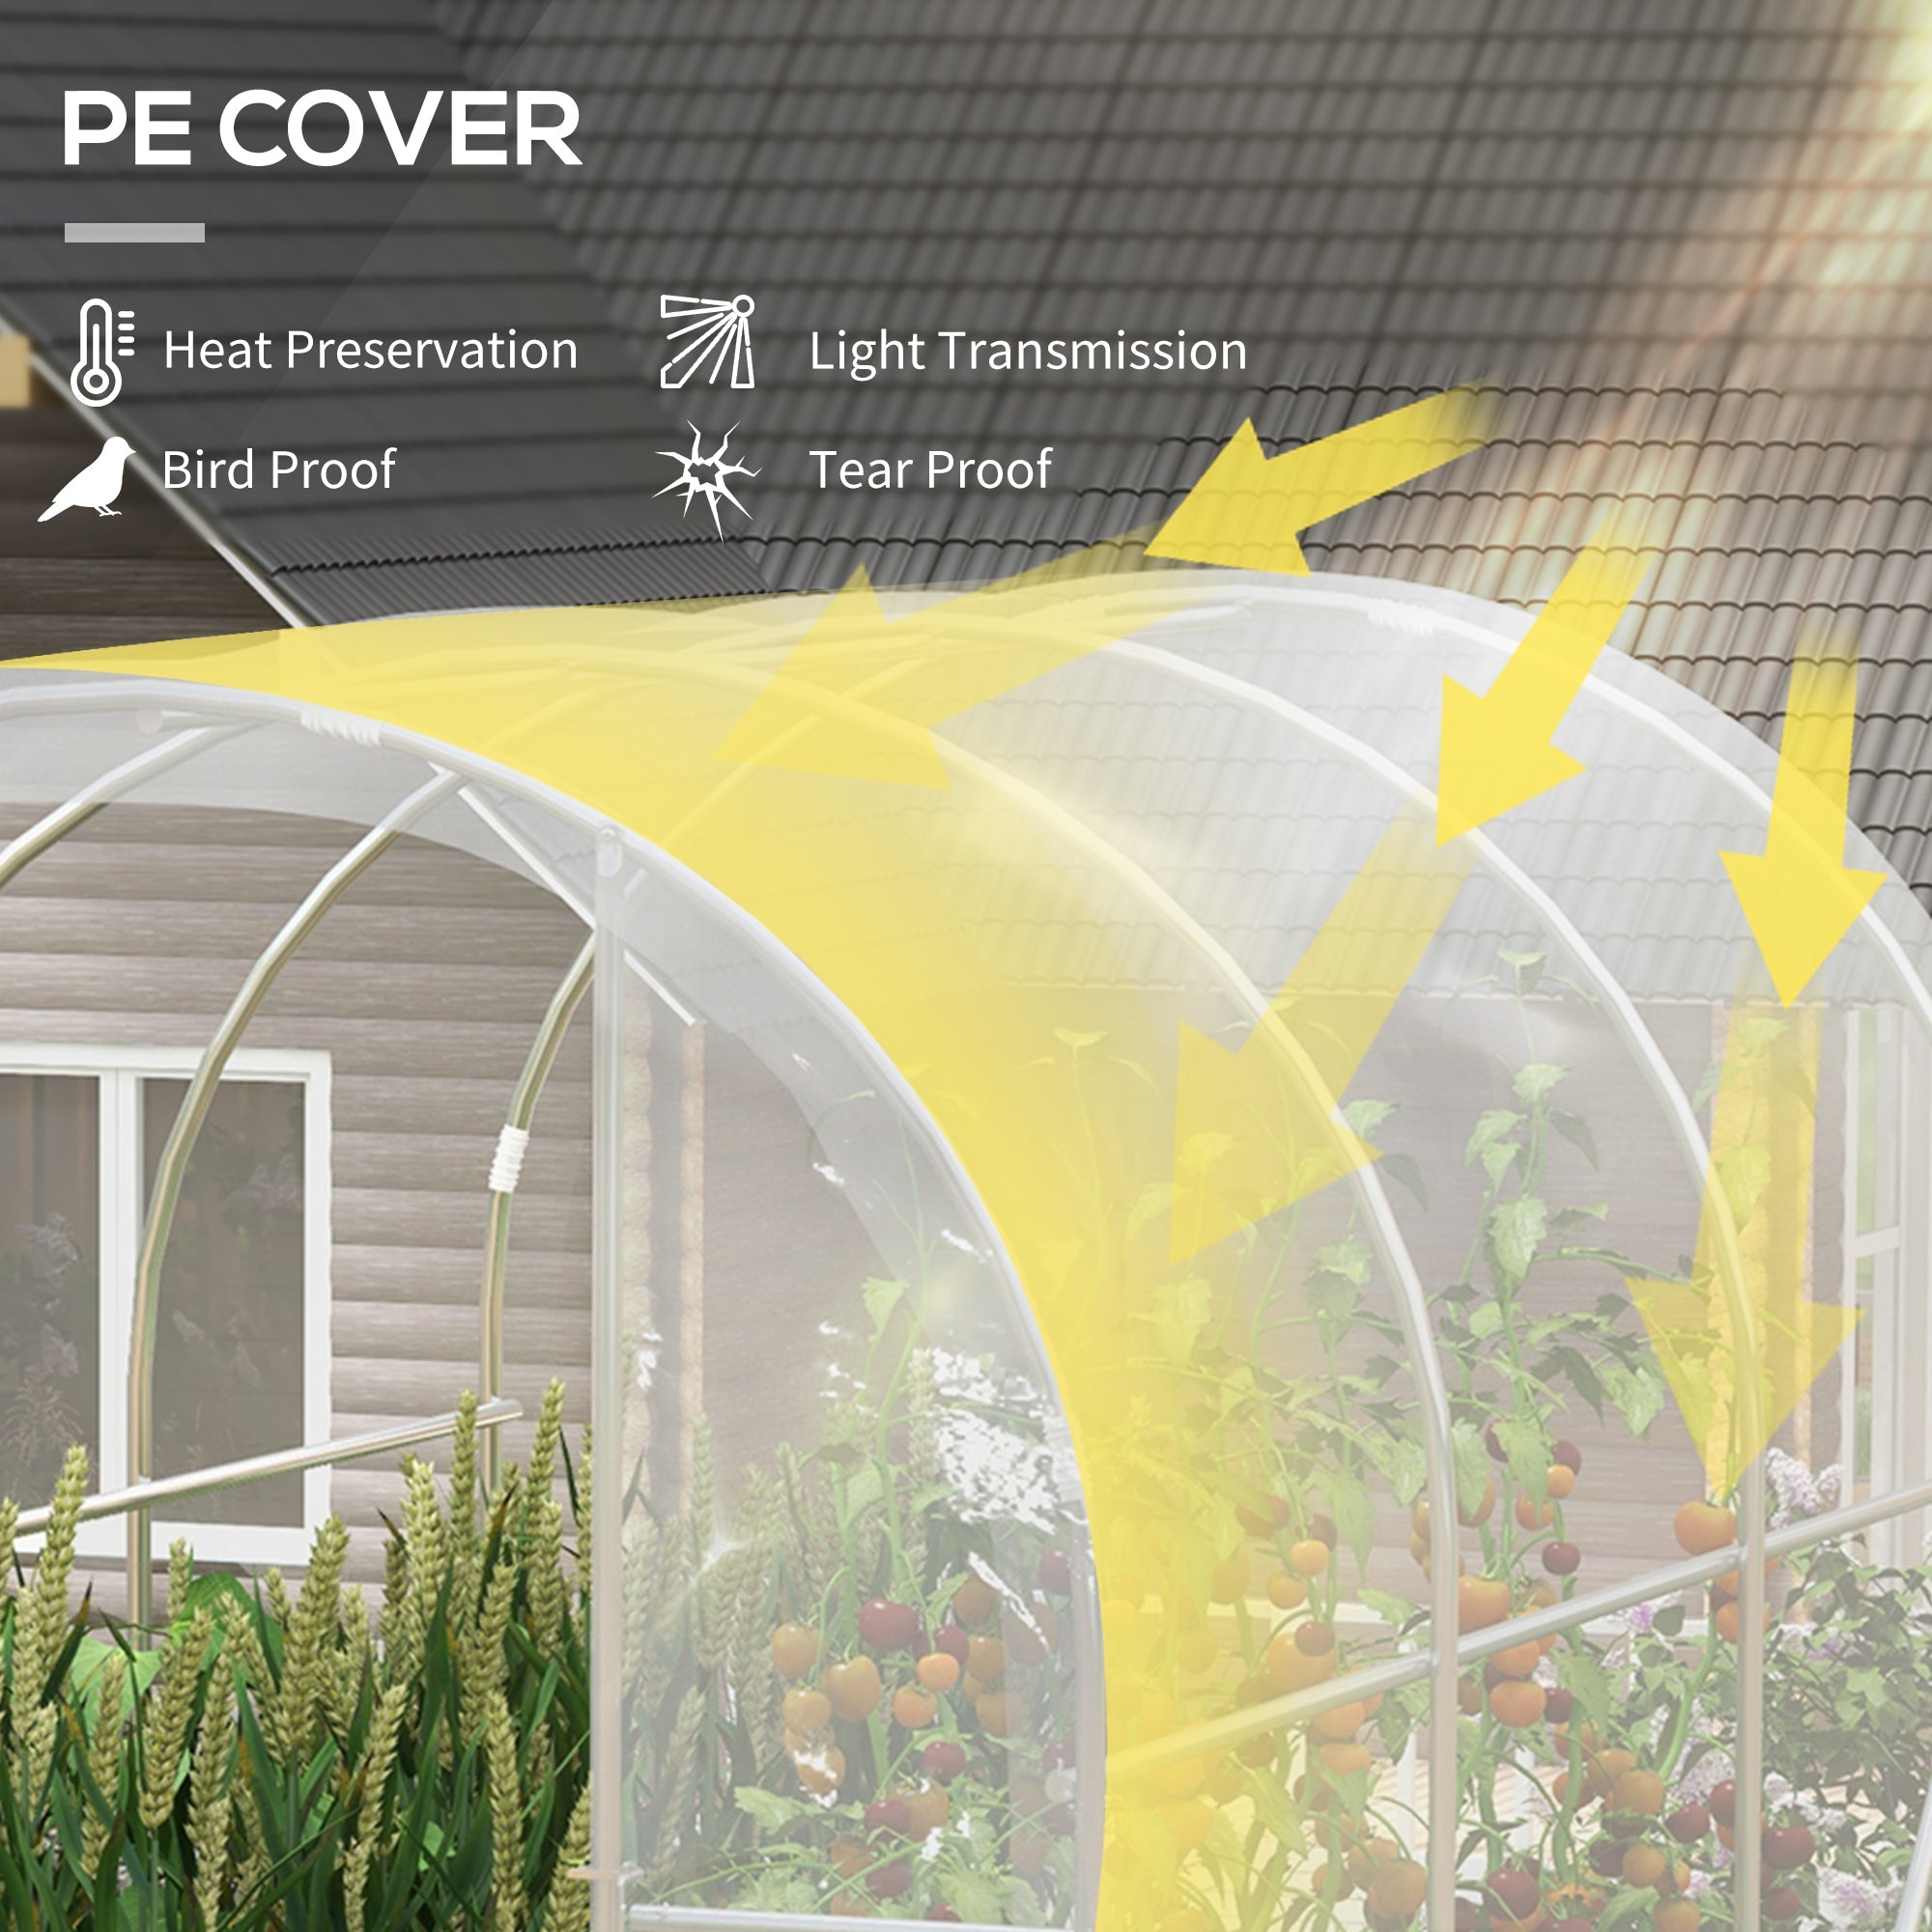 Polytunnel Greenhouse Walk-in Grow House with PE Cover, Door and Galvanised Steel Frame, 3 x 2 x 2m, Clear-3